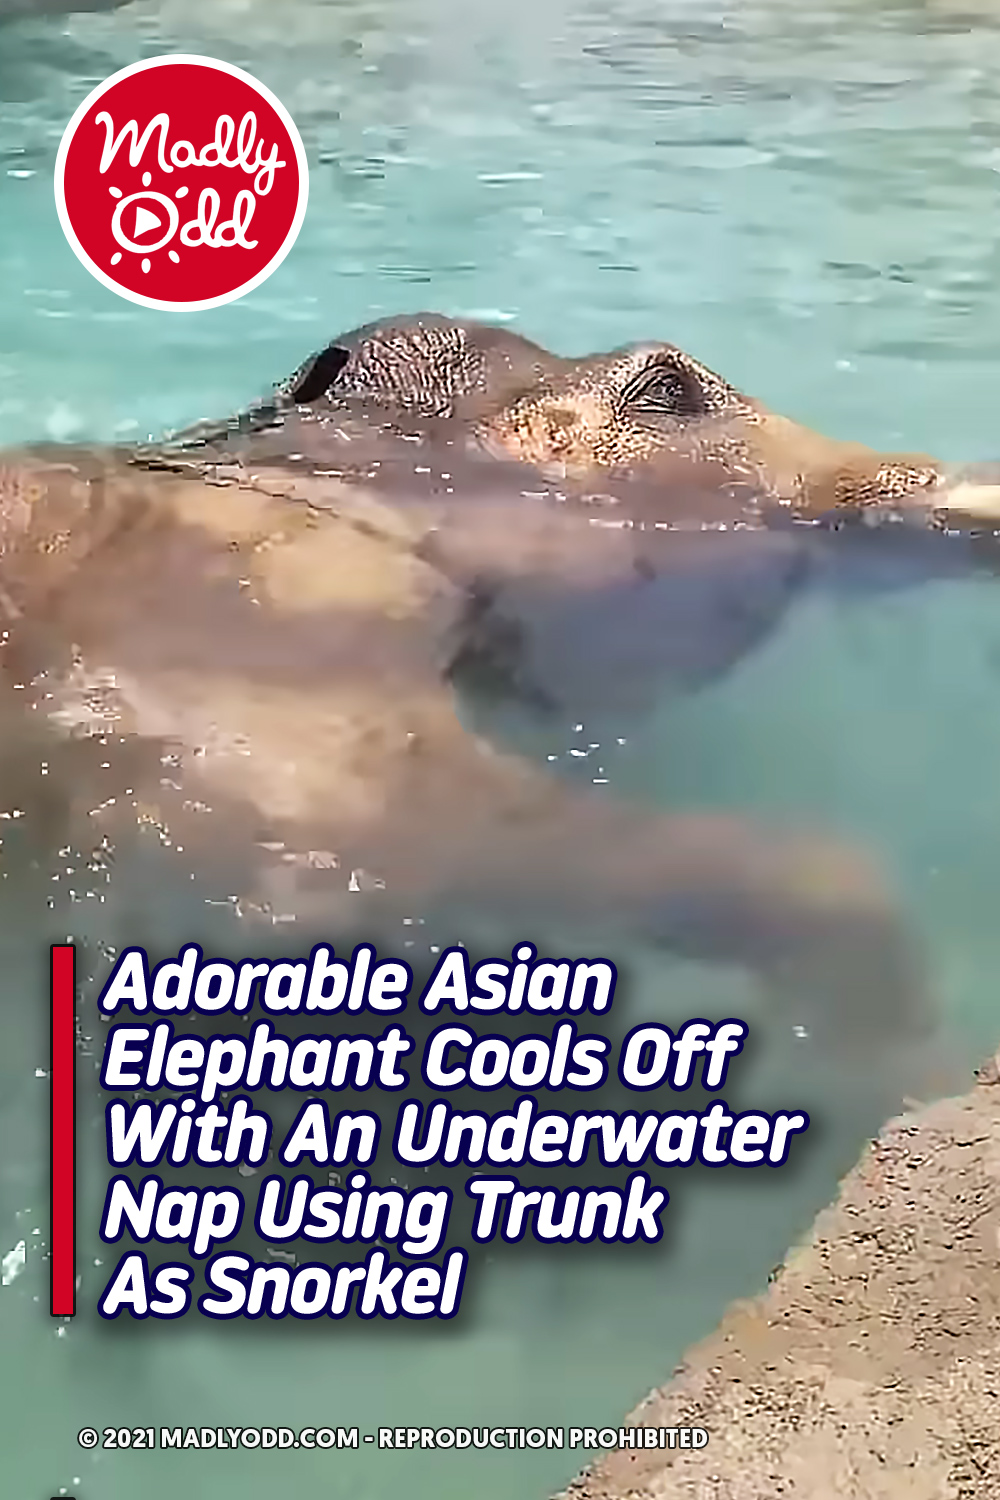 Adorable Asian Elephant Cools Off With An Underwater Nap Using Trunk As Snorkel